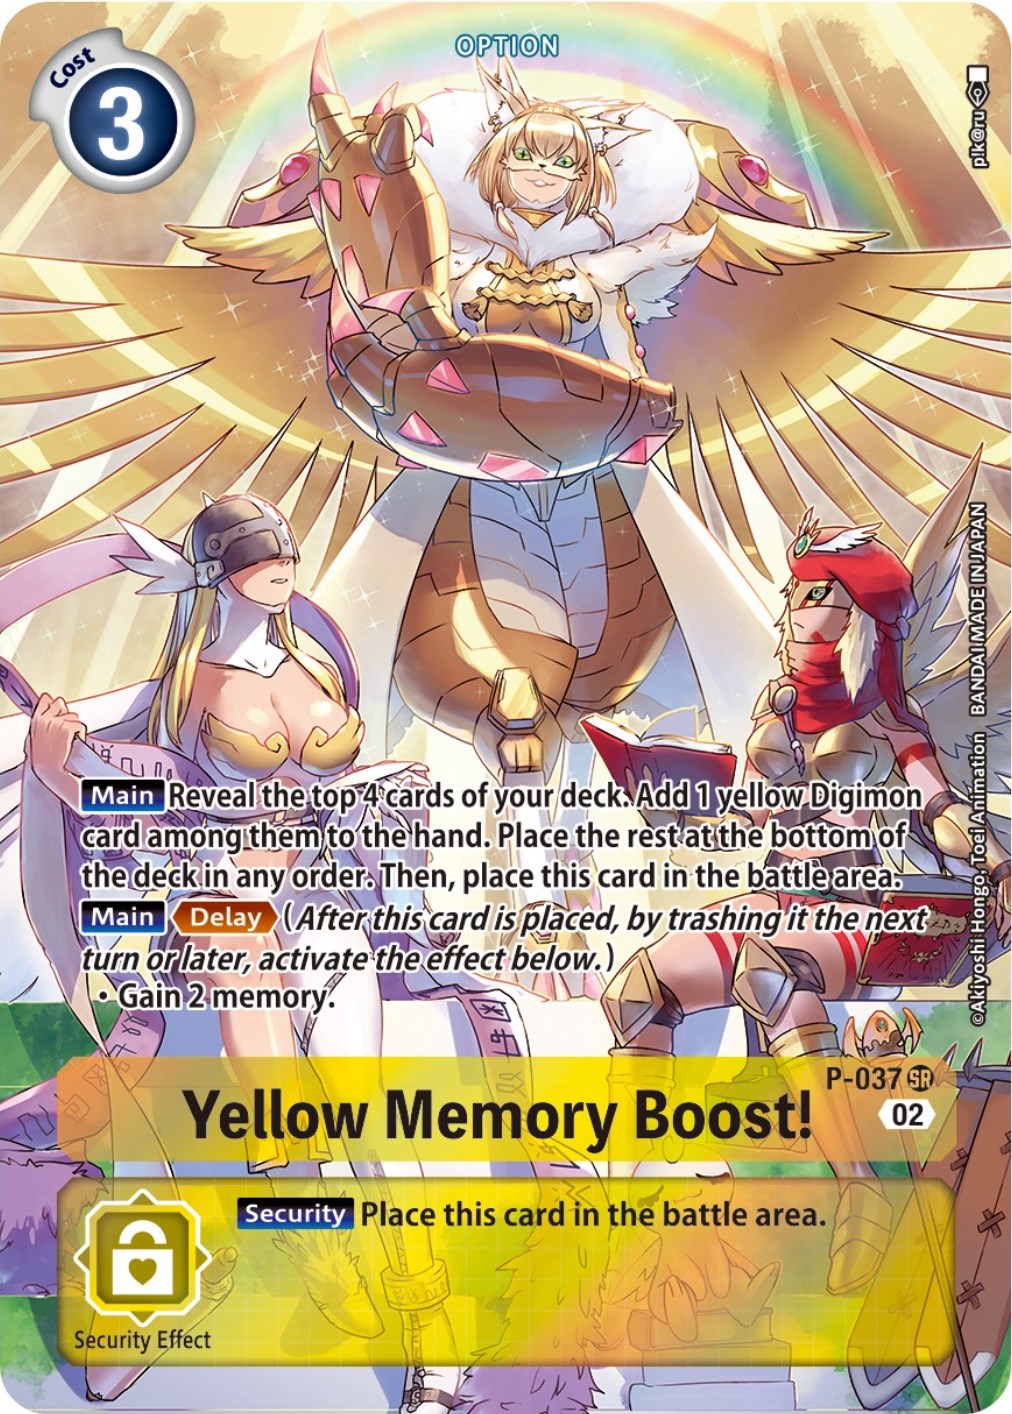 Yellow Memory Boost! [P-037] (Digimon Adventure Box 2) [Promotional Cards] | Viridian Forest